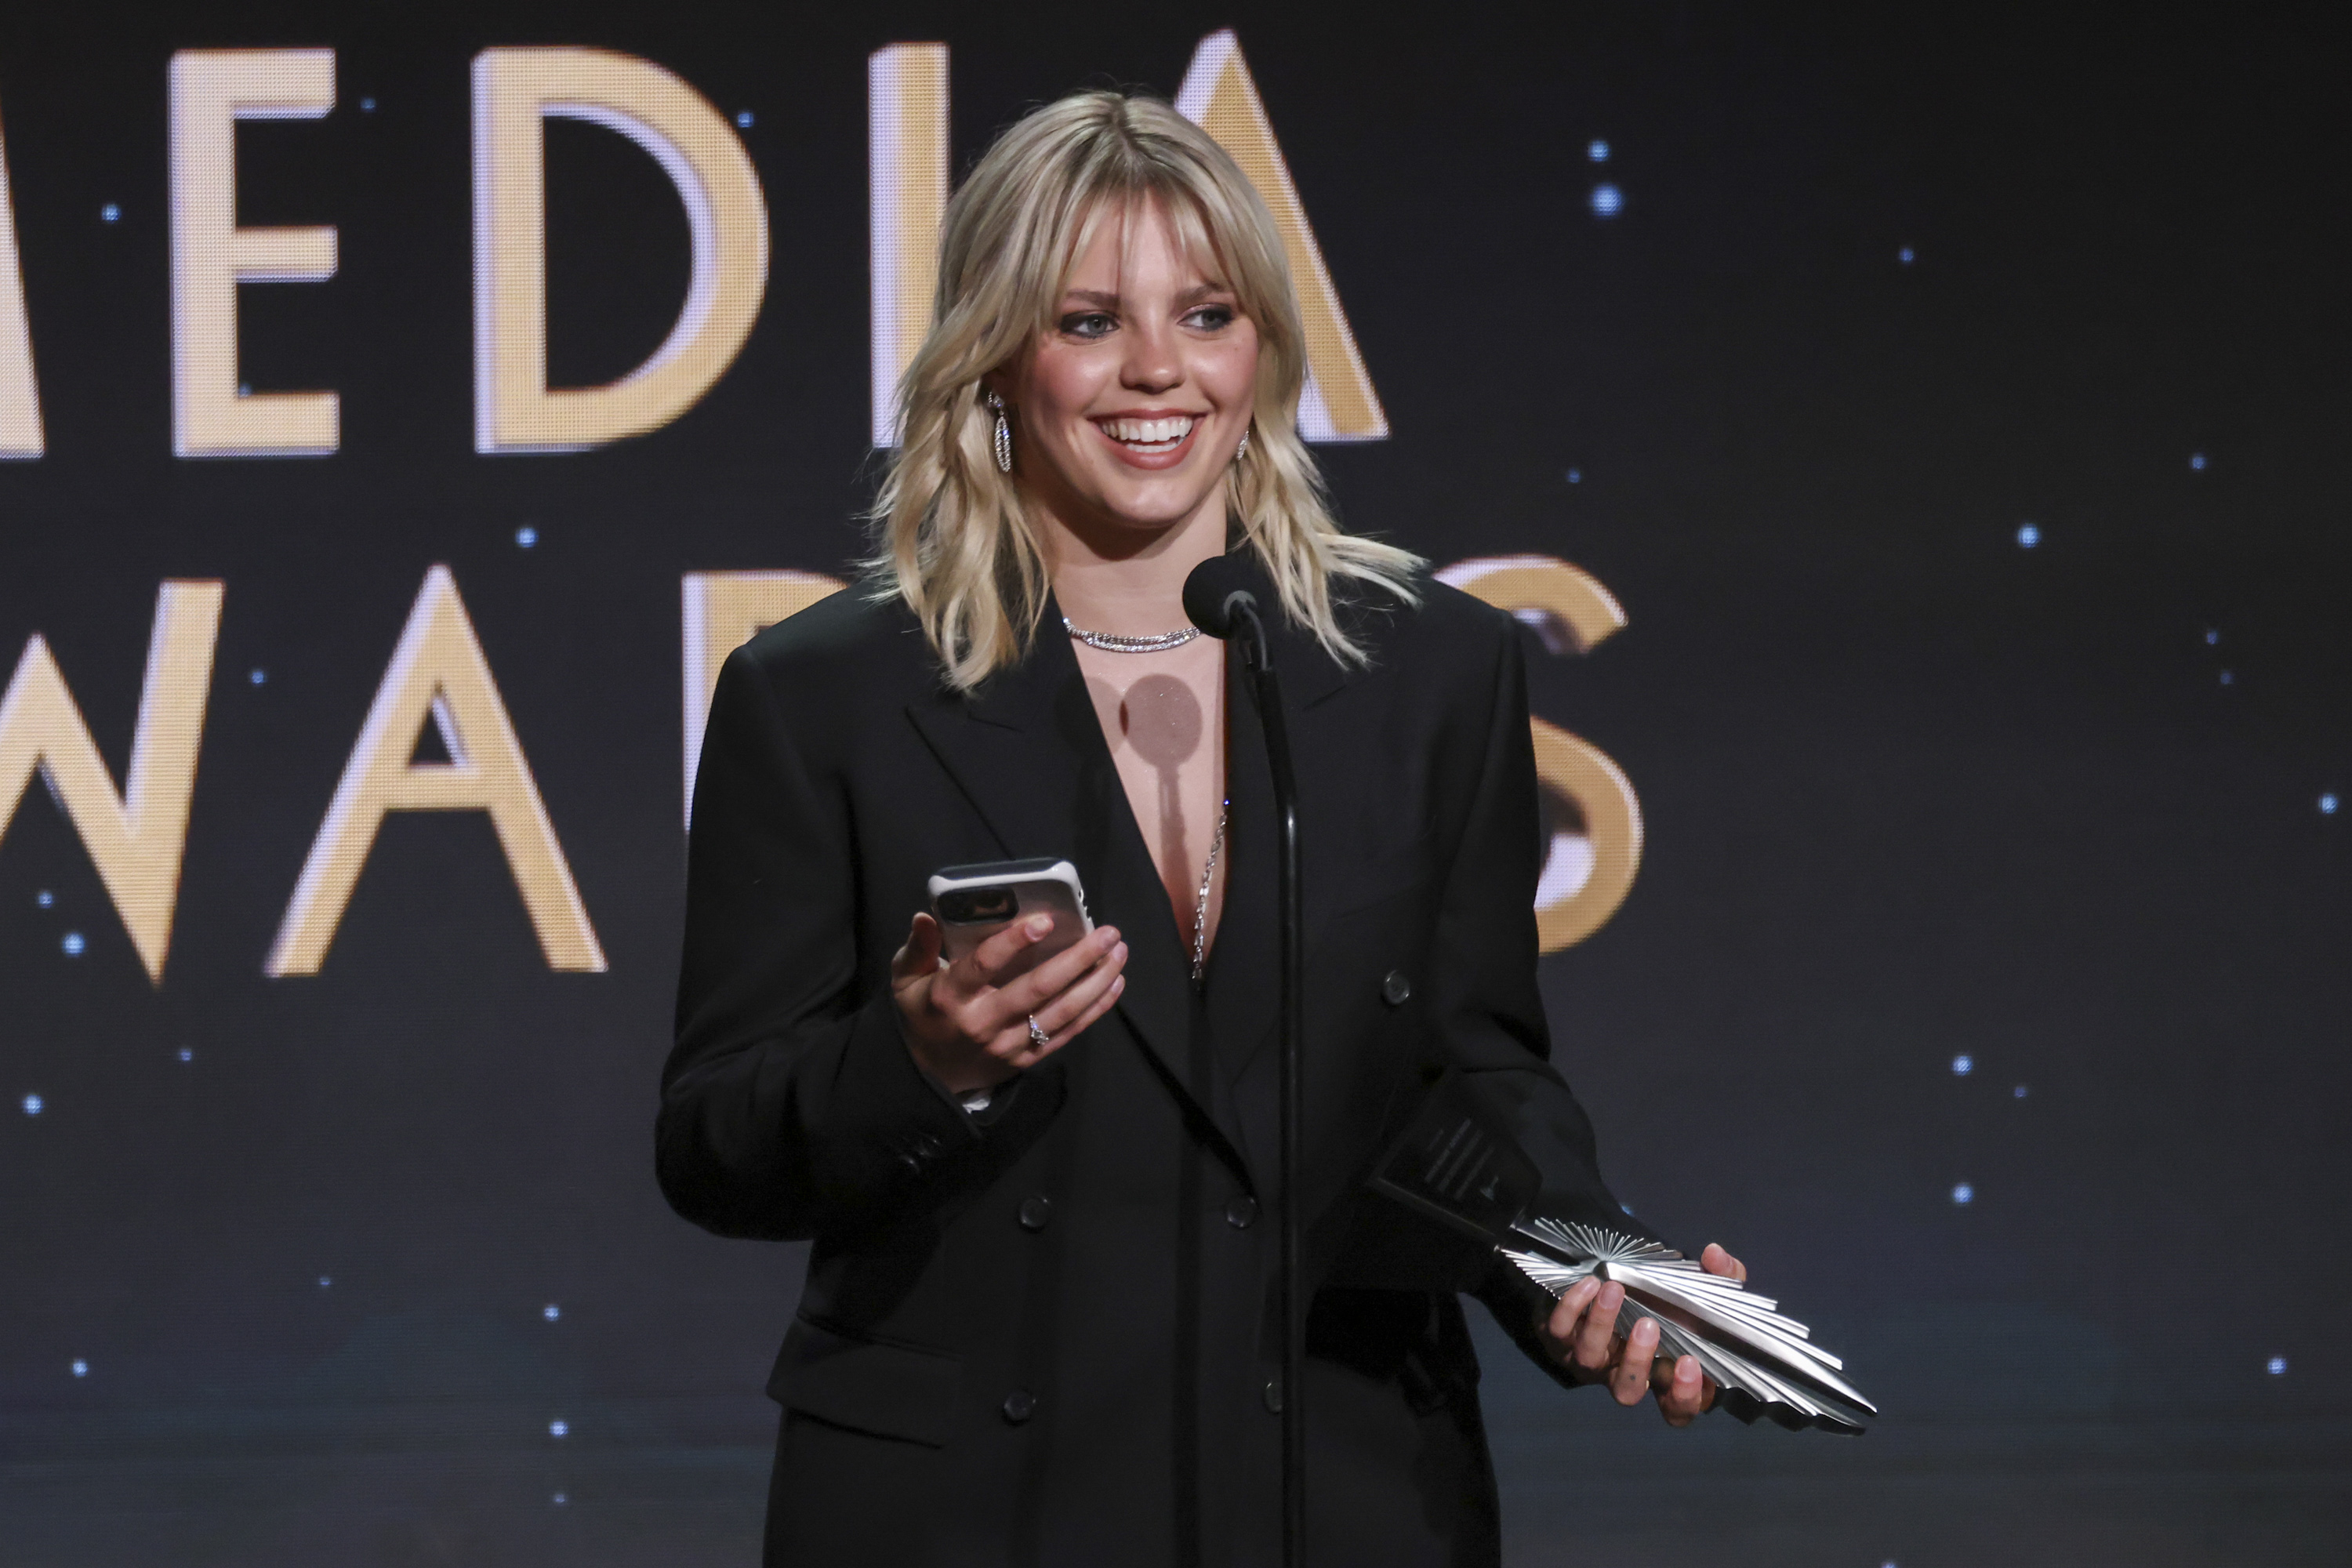 Reneé in a blazer holding a phone and award at a podium with &quot;MEDIA AWARDS&quot; in the background